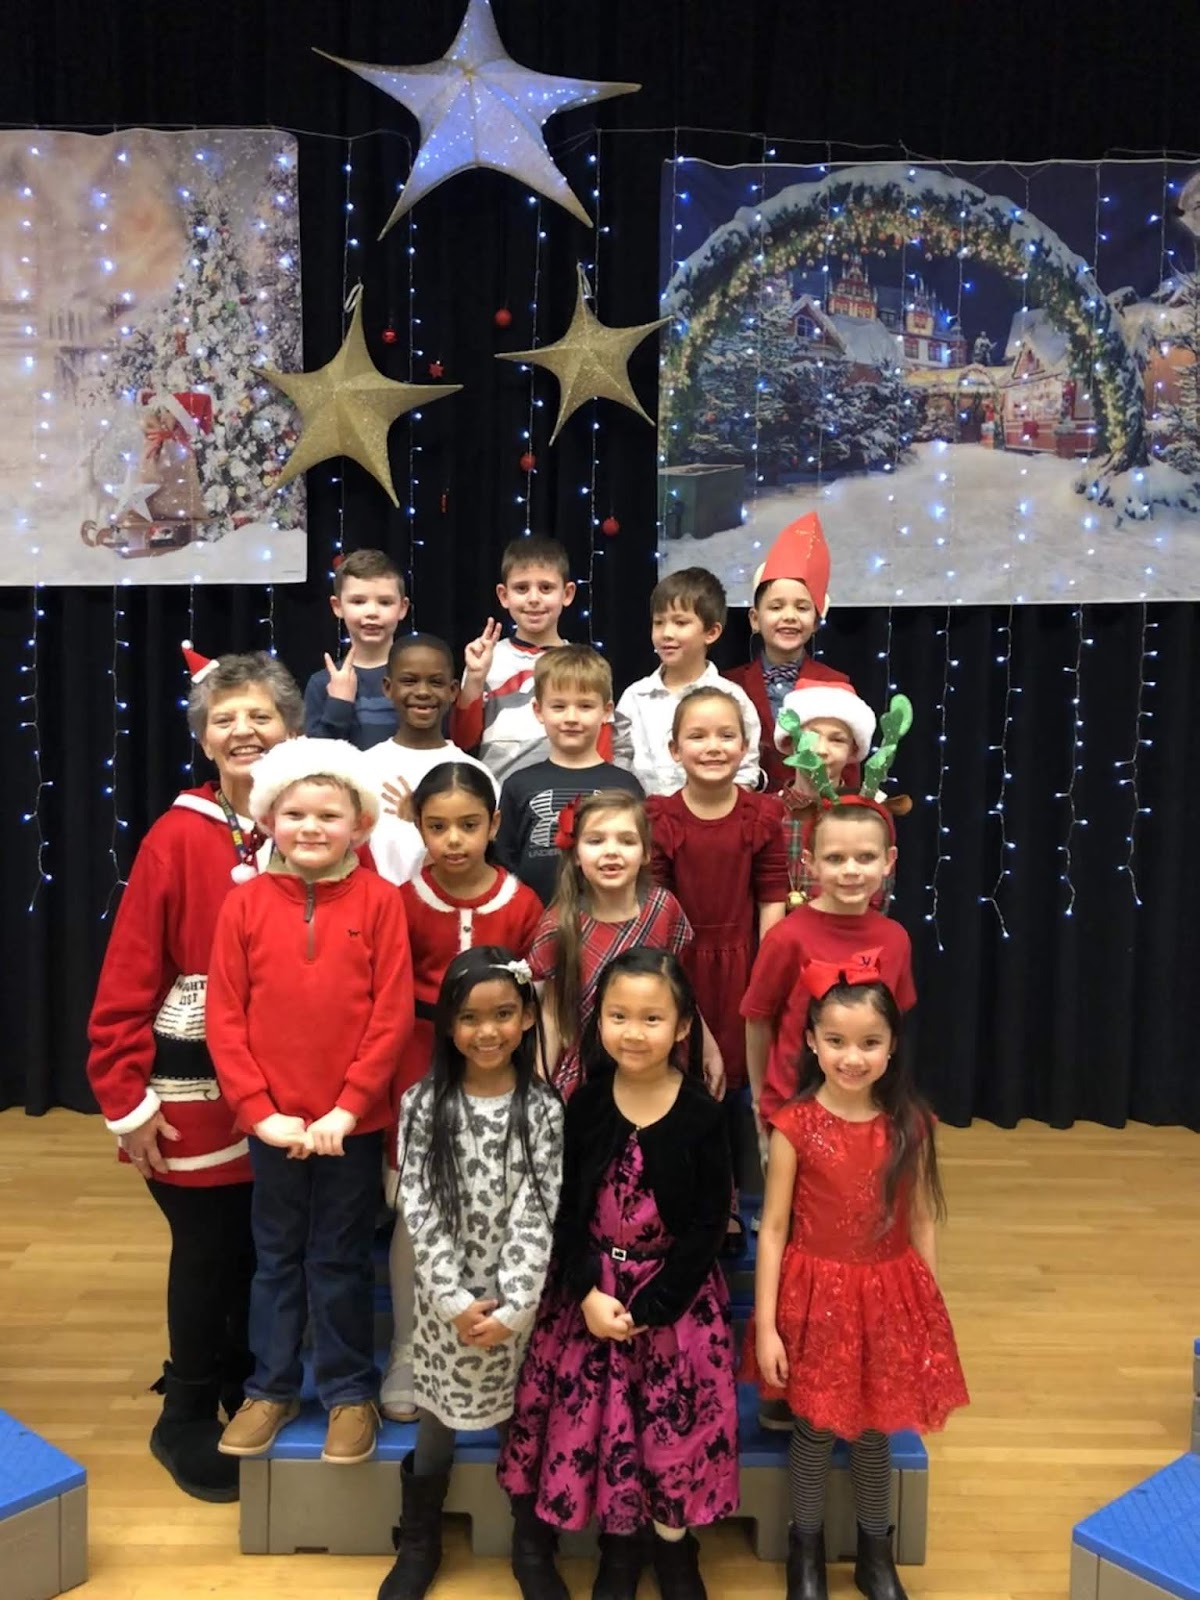 Welcome to the Krazy Kingdom: Canyon's Elementary Christmas Program